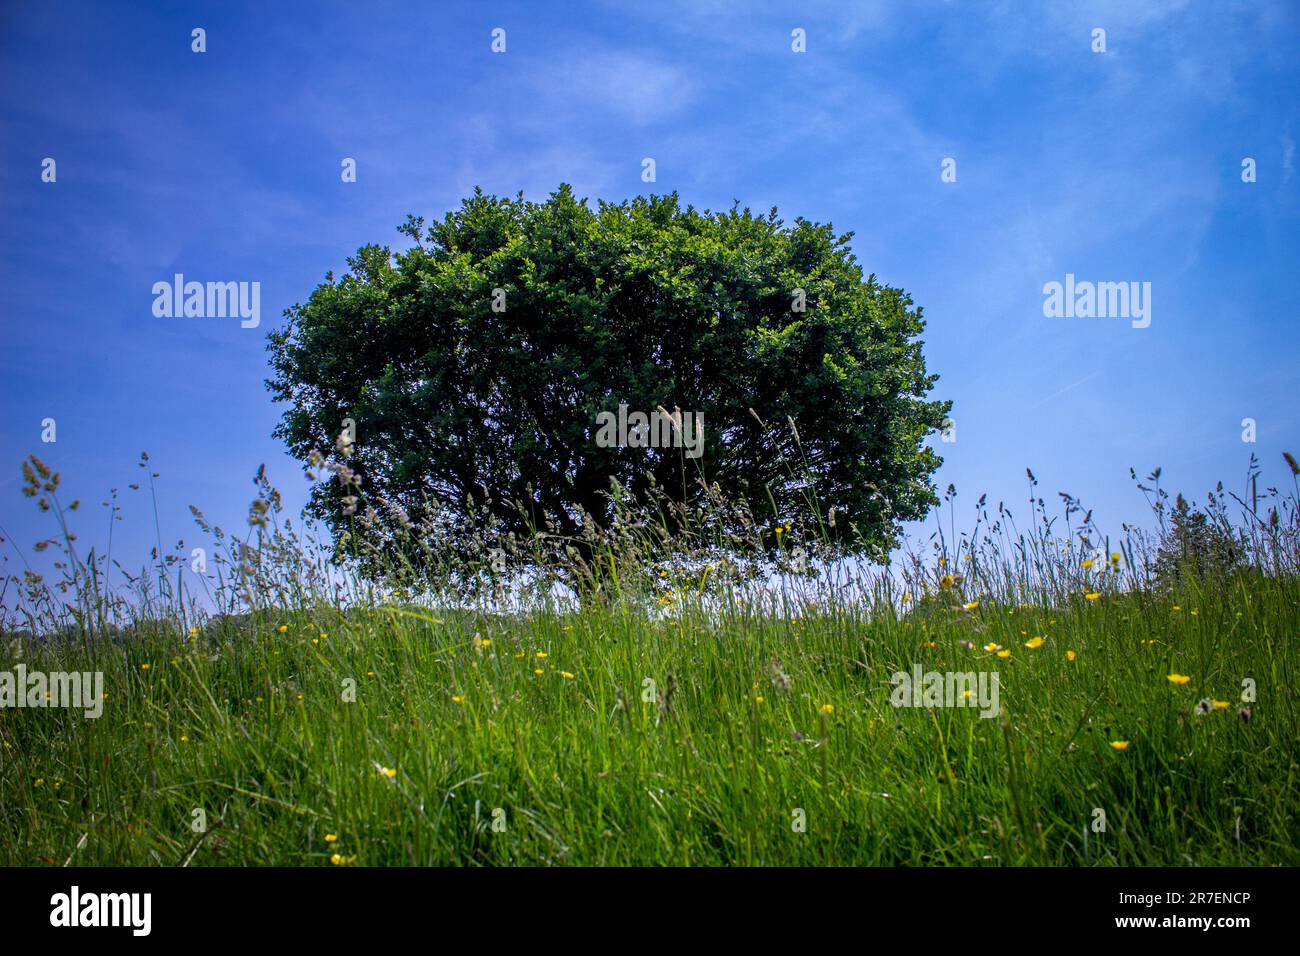 A perfectly oval  shaped oak tree in full leaf viewed from low down across grass and meadow land against a blue sky with wispy white clouds Stock Photo